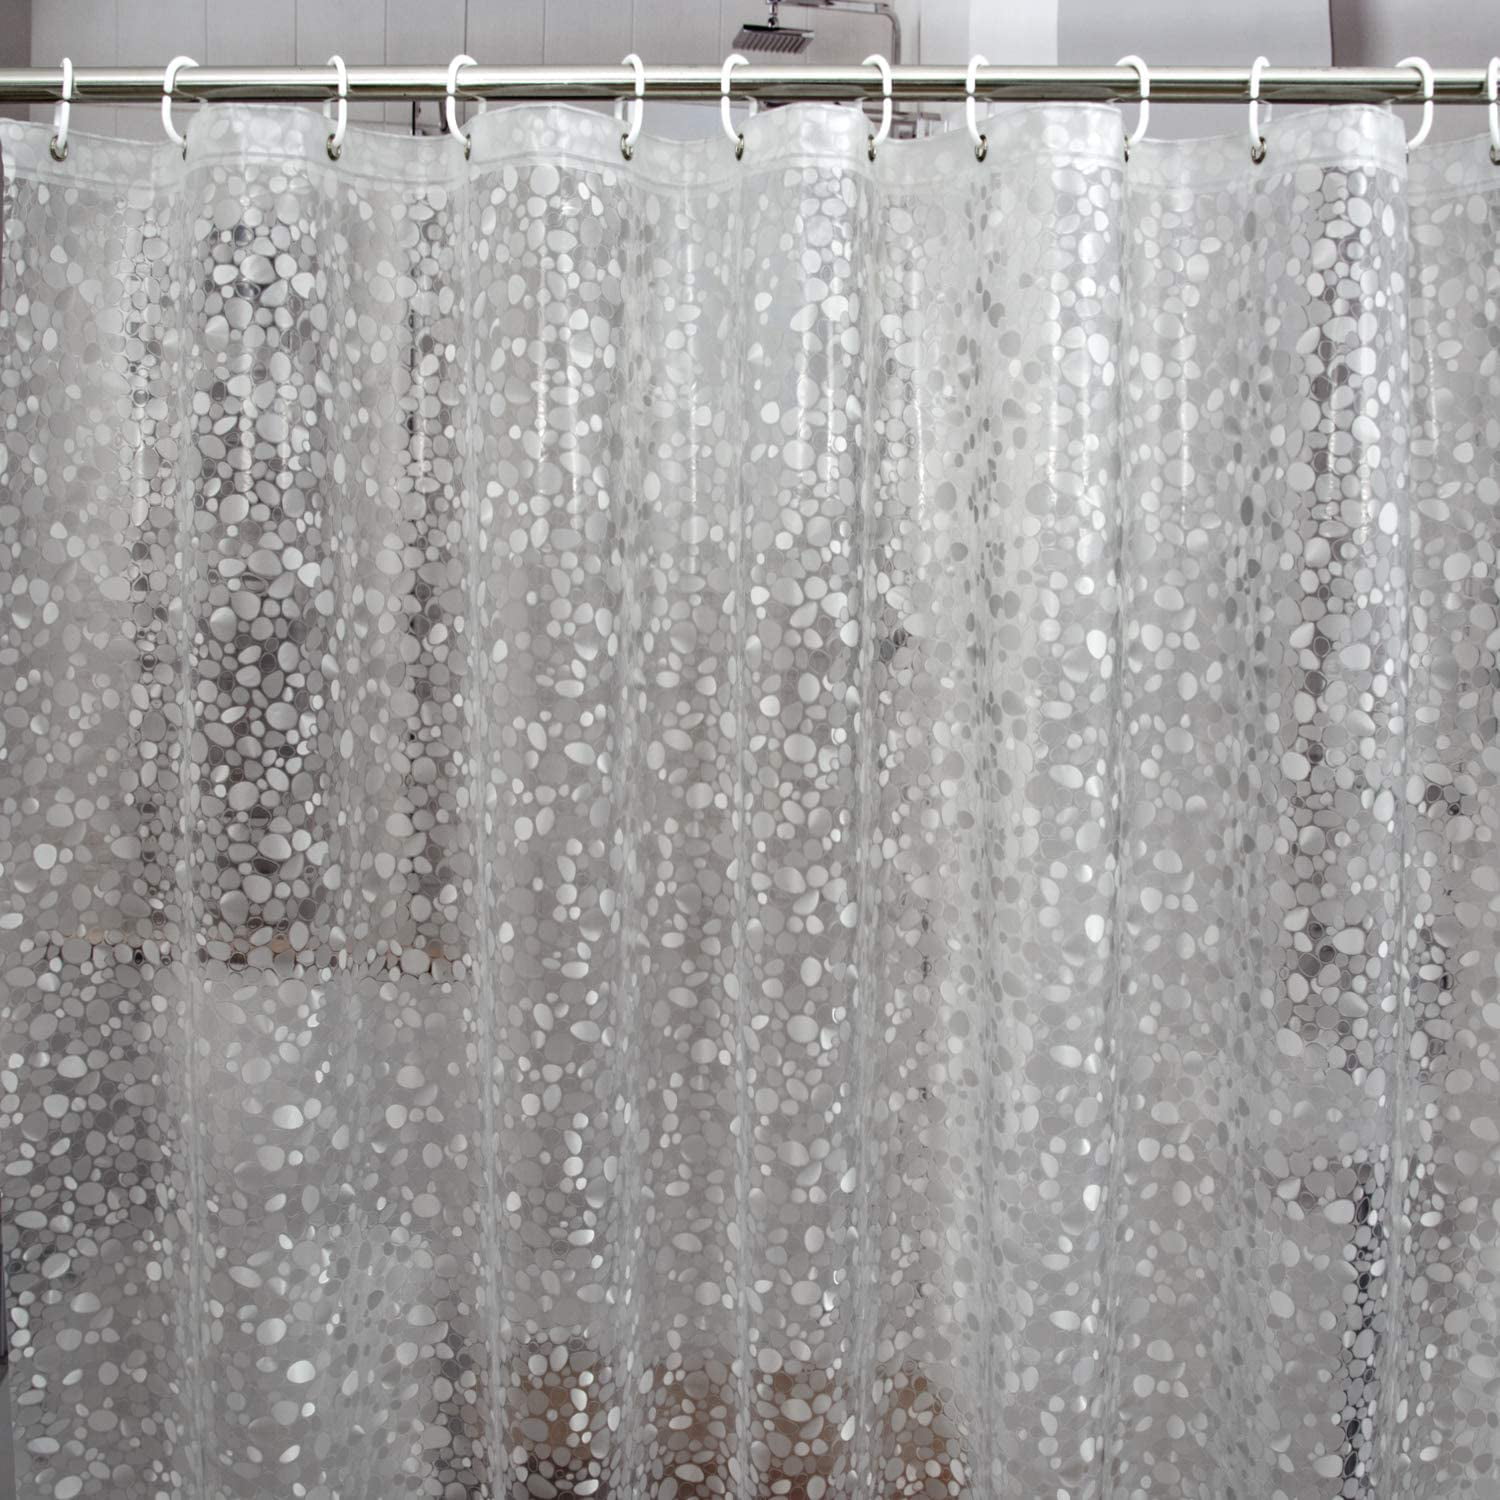 Details about   Heavy Duty EVA Shower Curtain Liner 72" x 72",Waterproof No Chemical,12 Hooks 